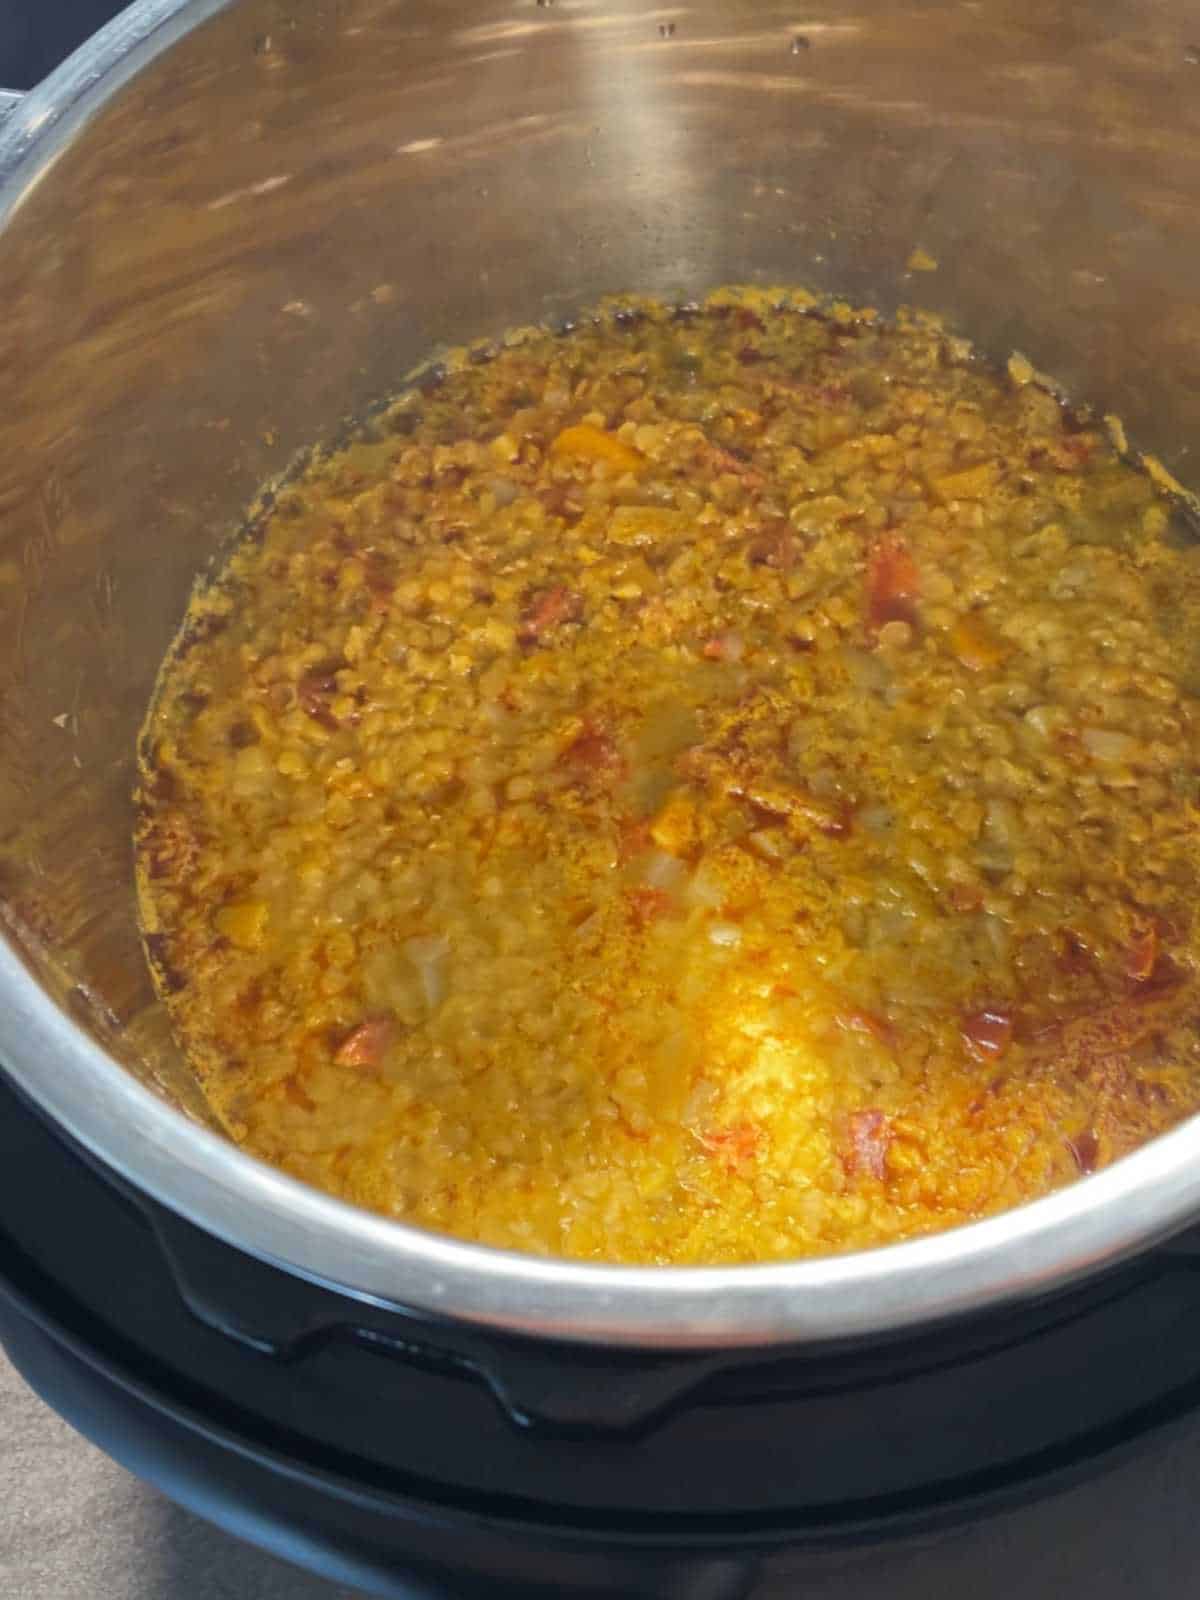 Chorizo and Red Lentil Soup just pressure cooked, seen from above inside the stainless steel inner pot of an Instant Pot